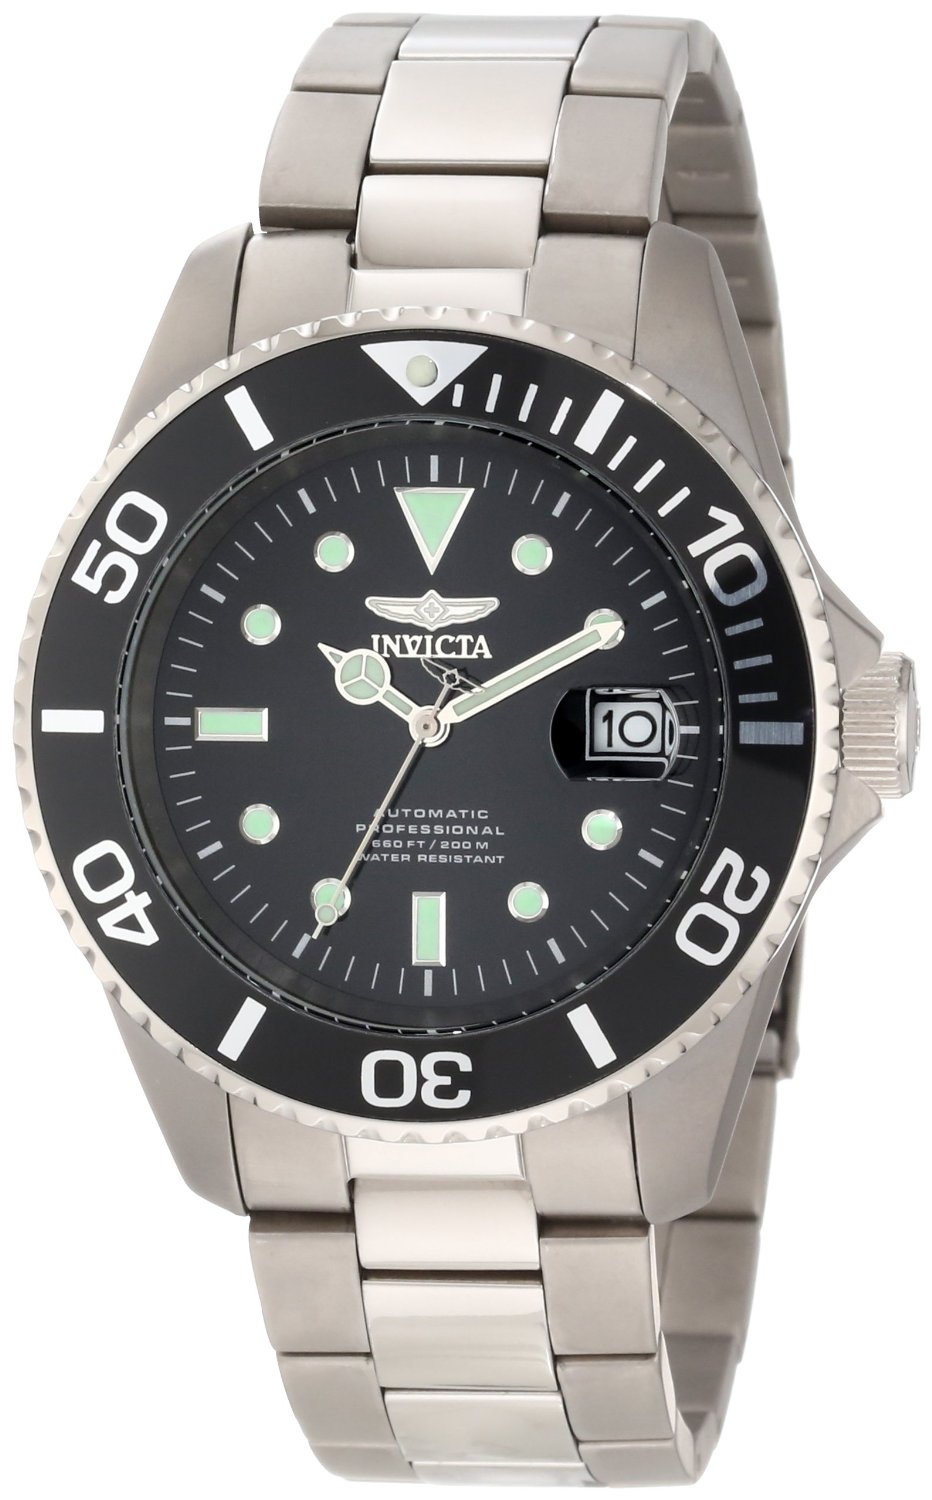 Invicta Pro Diver Men's Automatic Watch with Black Dial Analogue Display and Silver Titanium Bracelet 0420